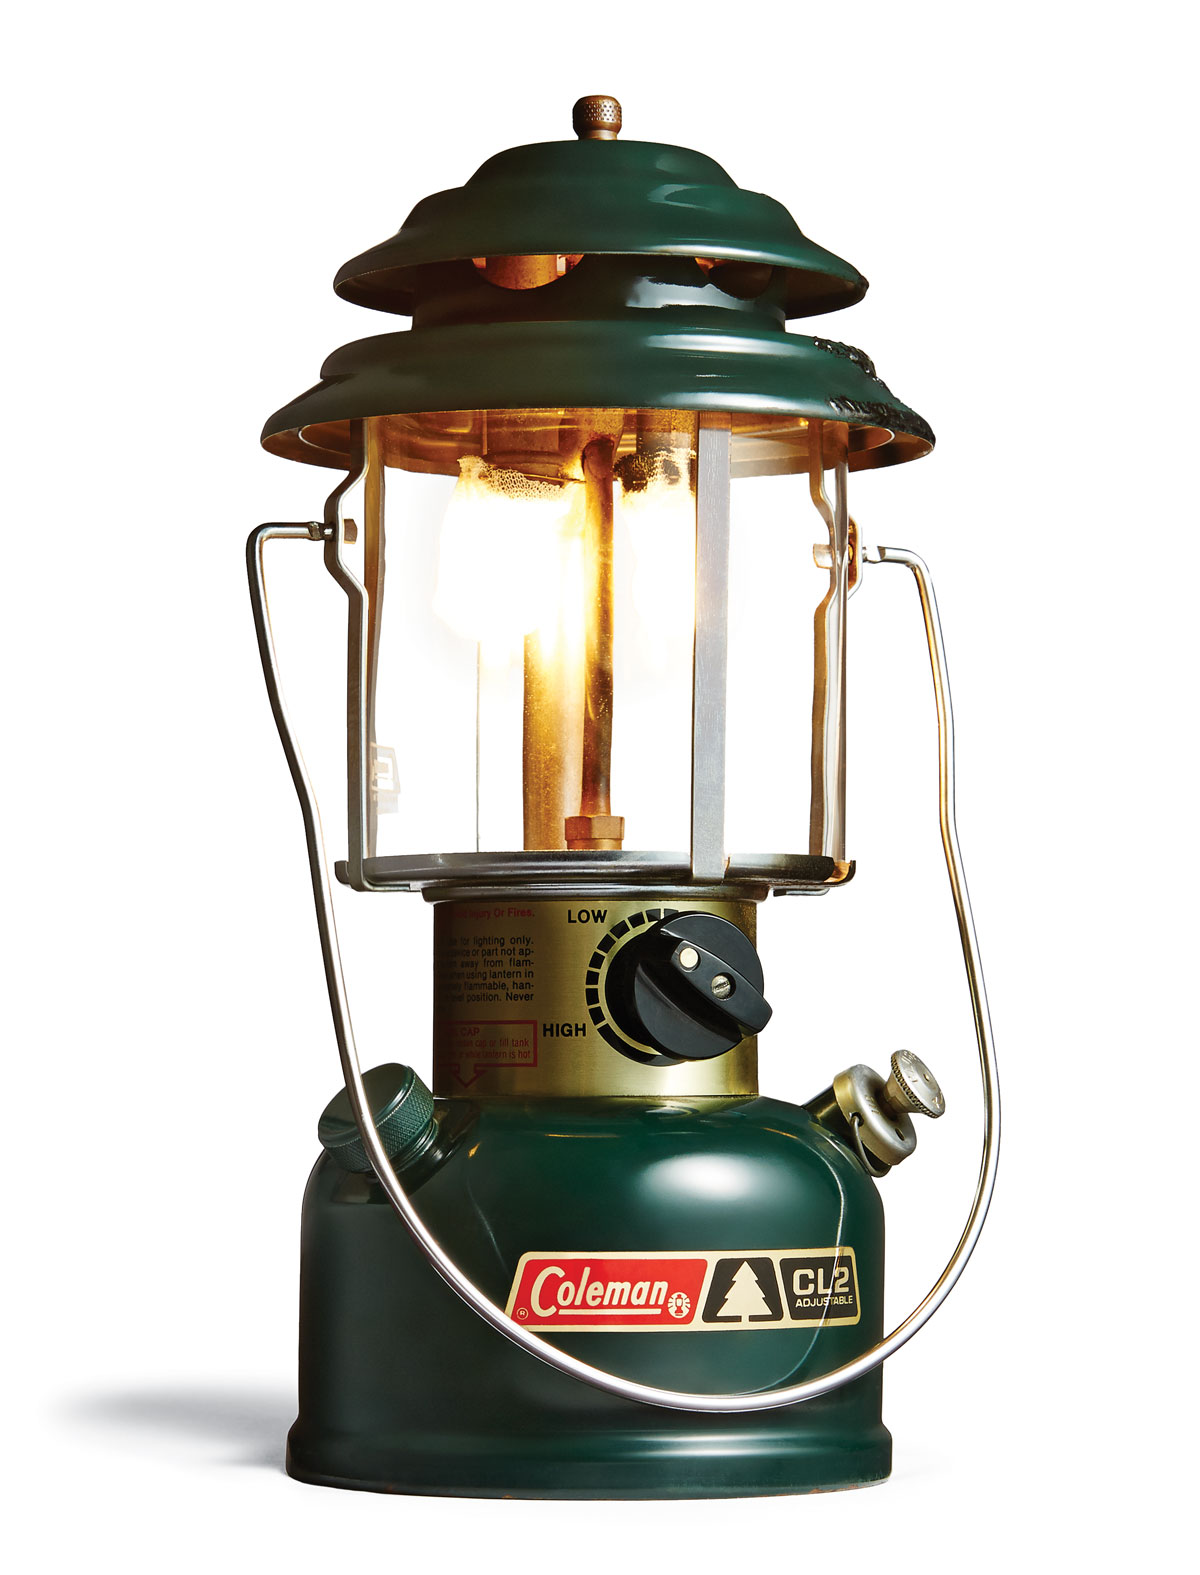 7 Things You Never Knew About the Coleman Lantern